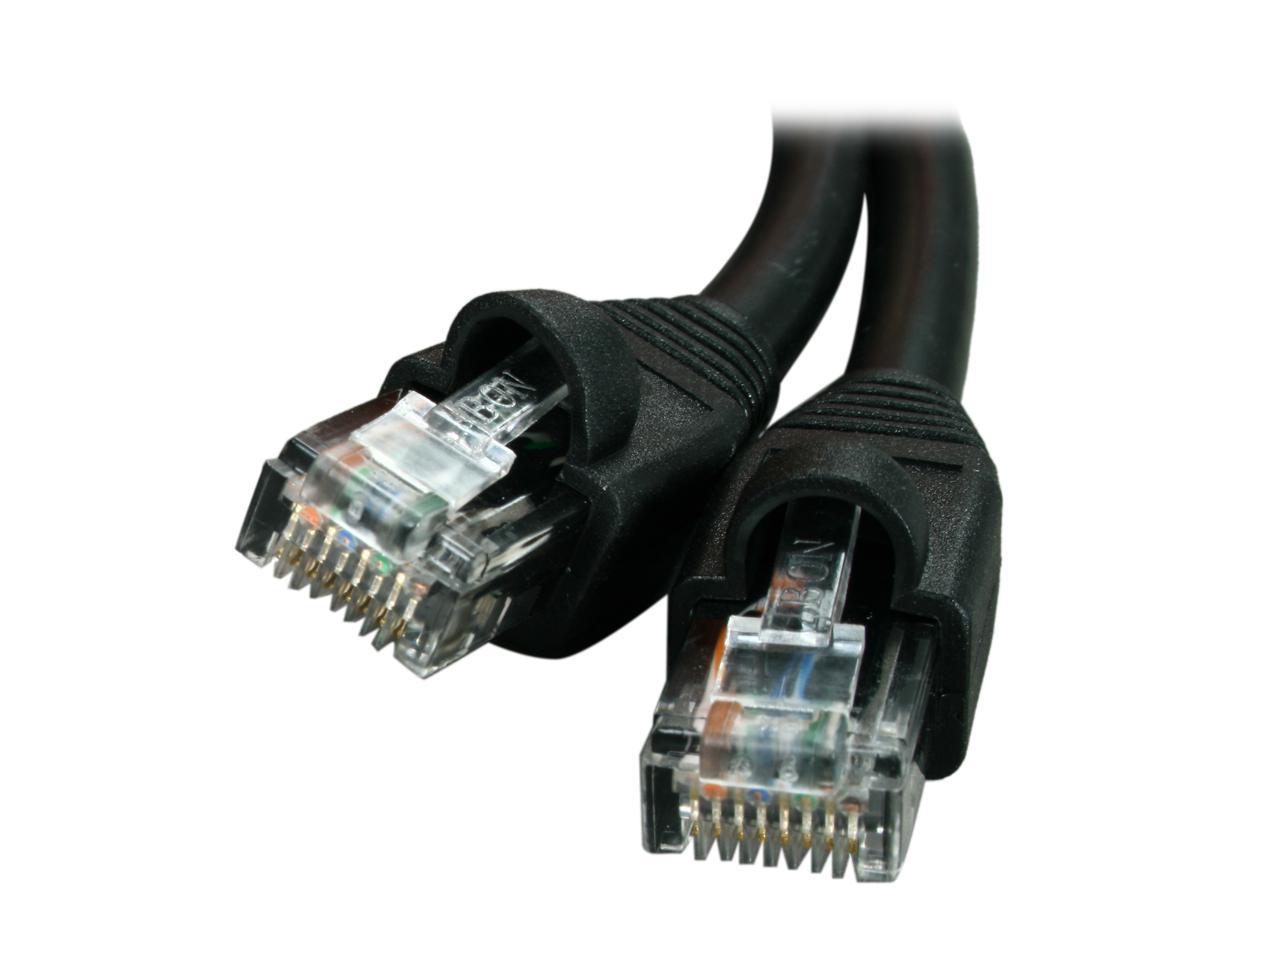 Rosewill 7-Feet Cat 6 Network Cable Black RCW-562 